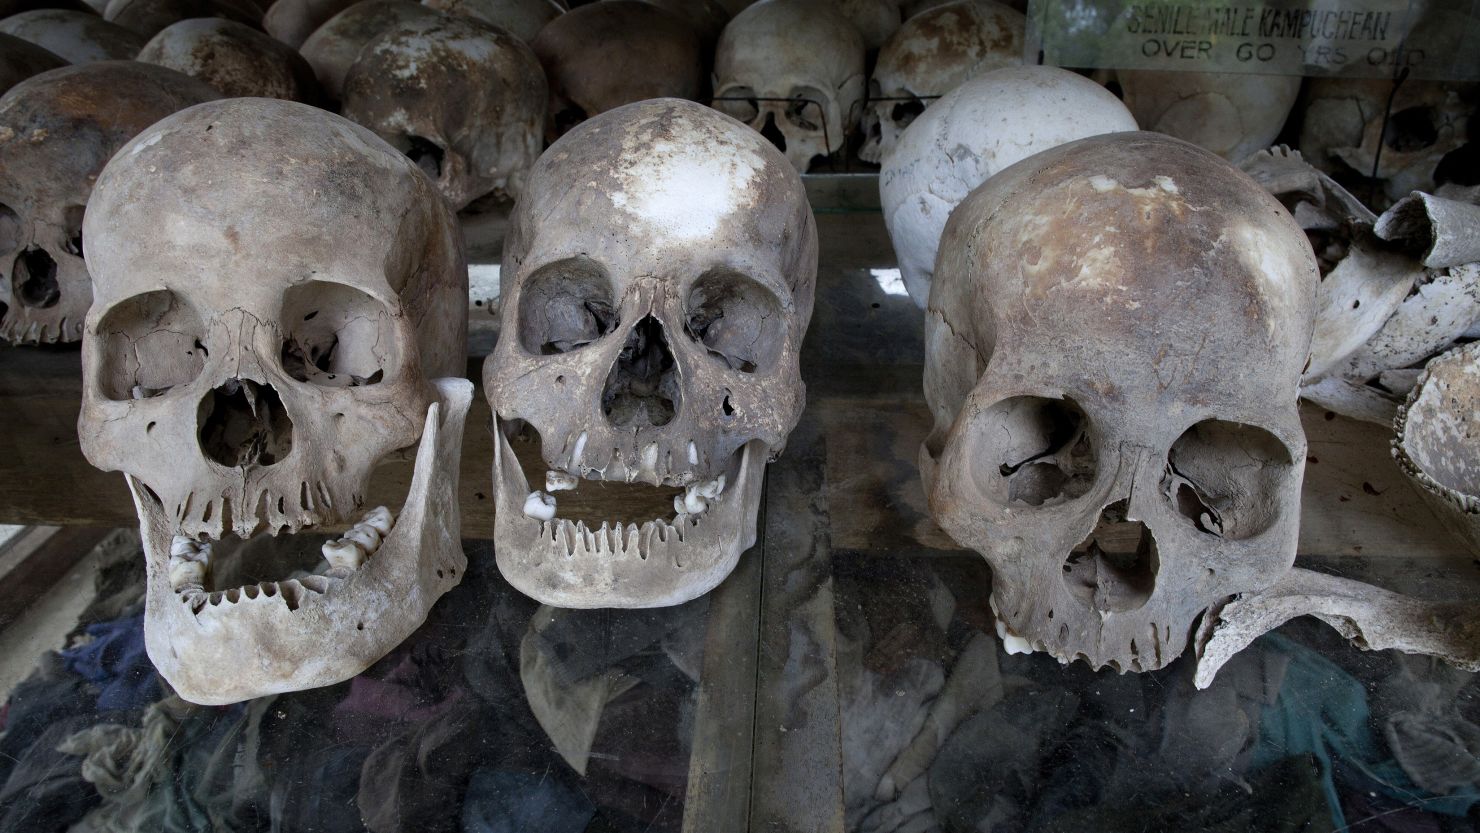 The skulls of Khmer Rouge victims on display in Cambodia. Ieng Sary, one of the regime's leaders, died Thursday while on trial.